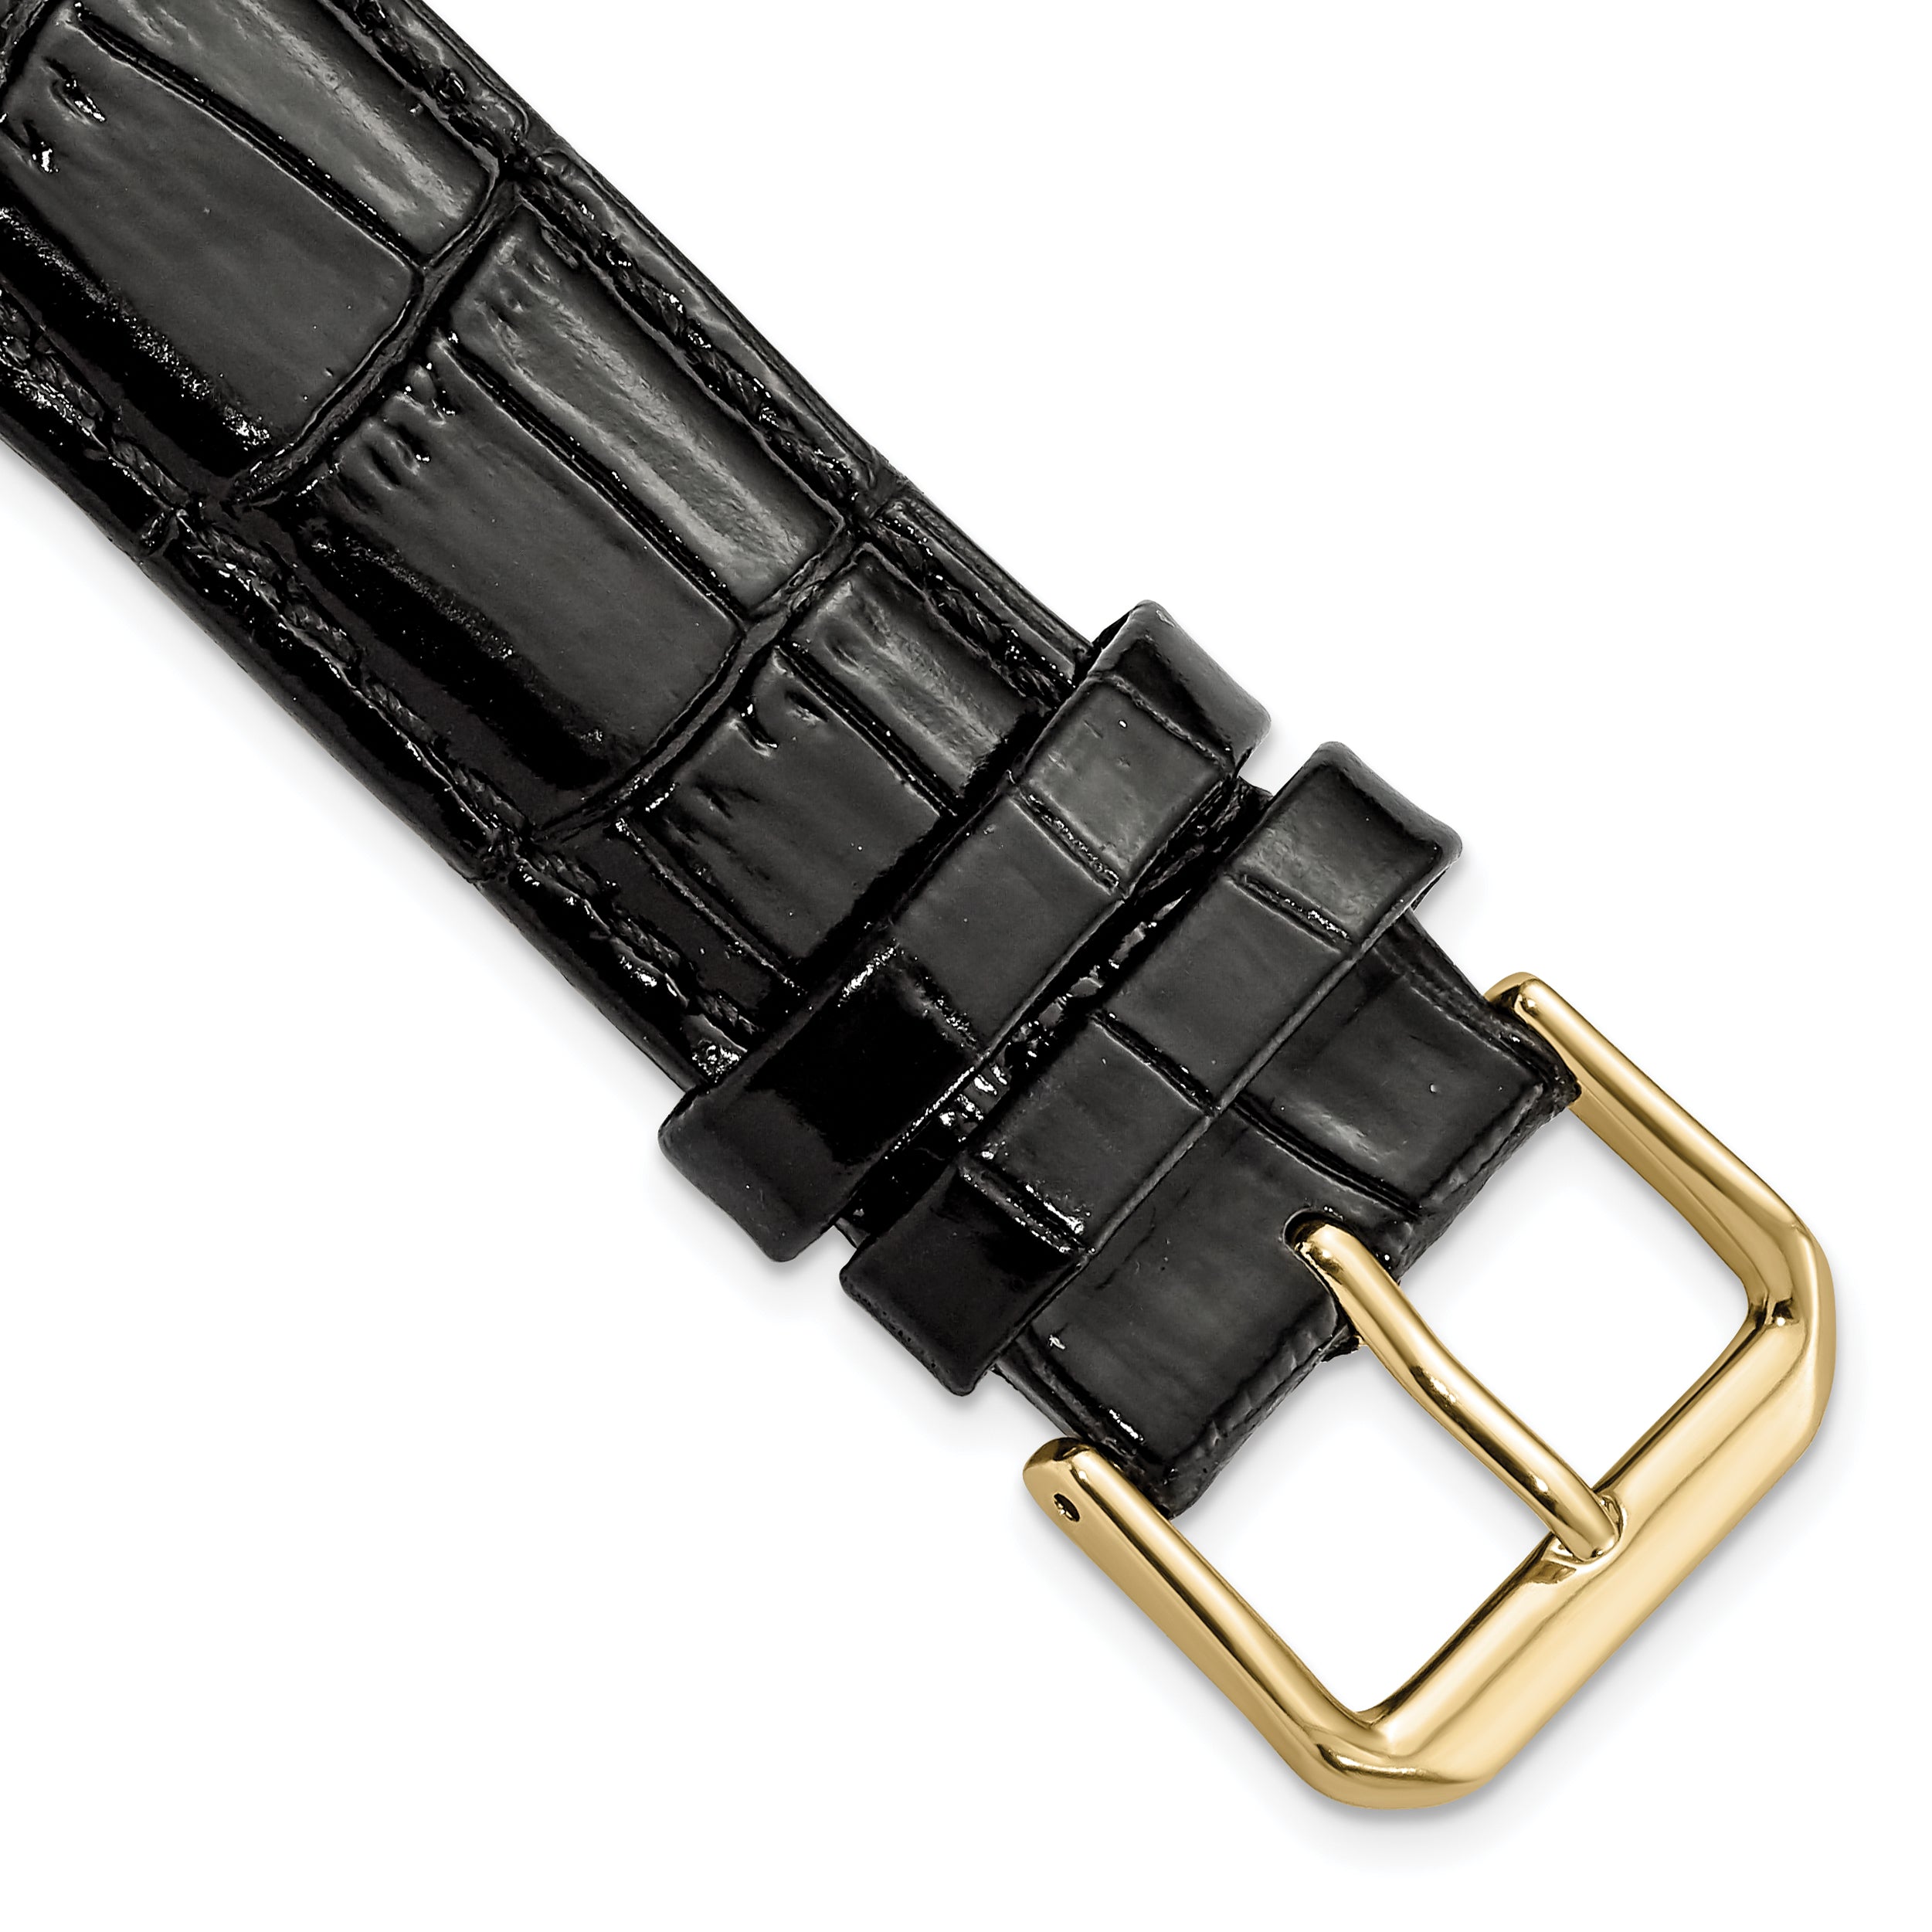 DeBeer 19mm Black Crocodile Grain Leather with Dark Stitching and Gold-tone Buckle 7.5 inch Watch Band